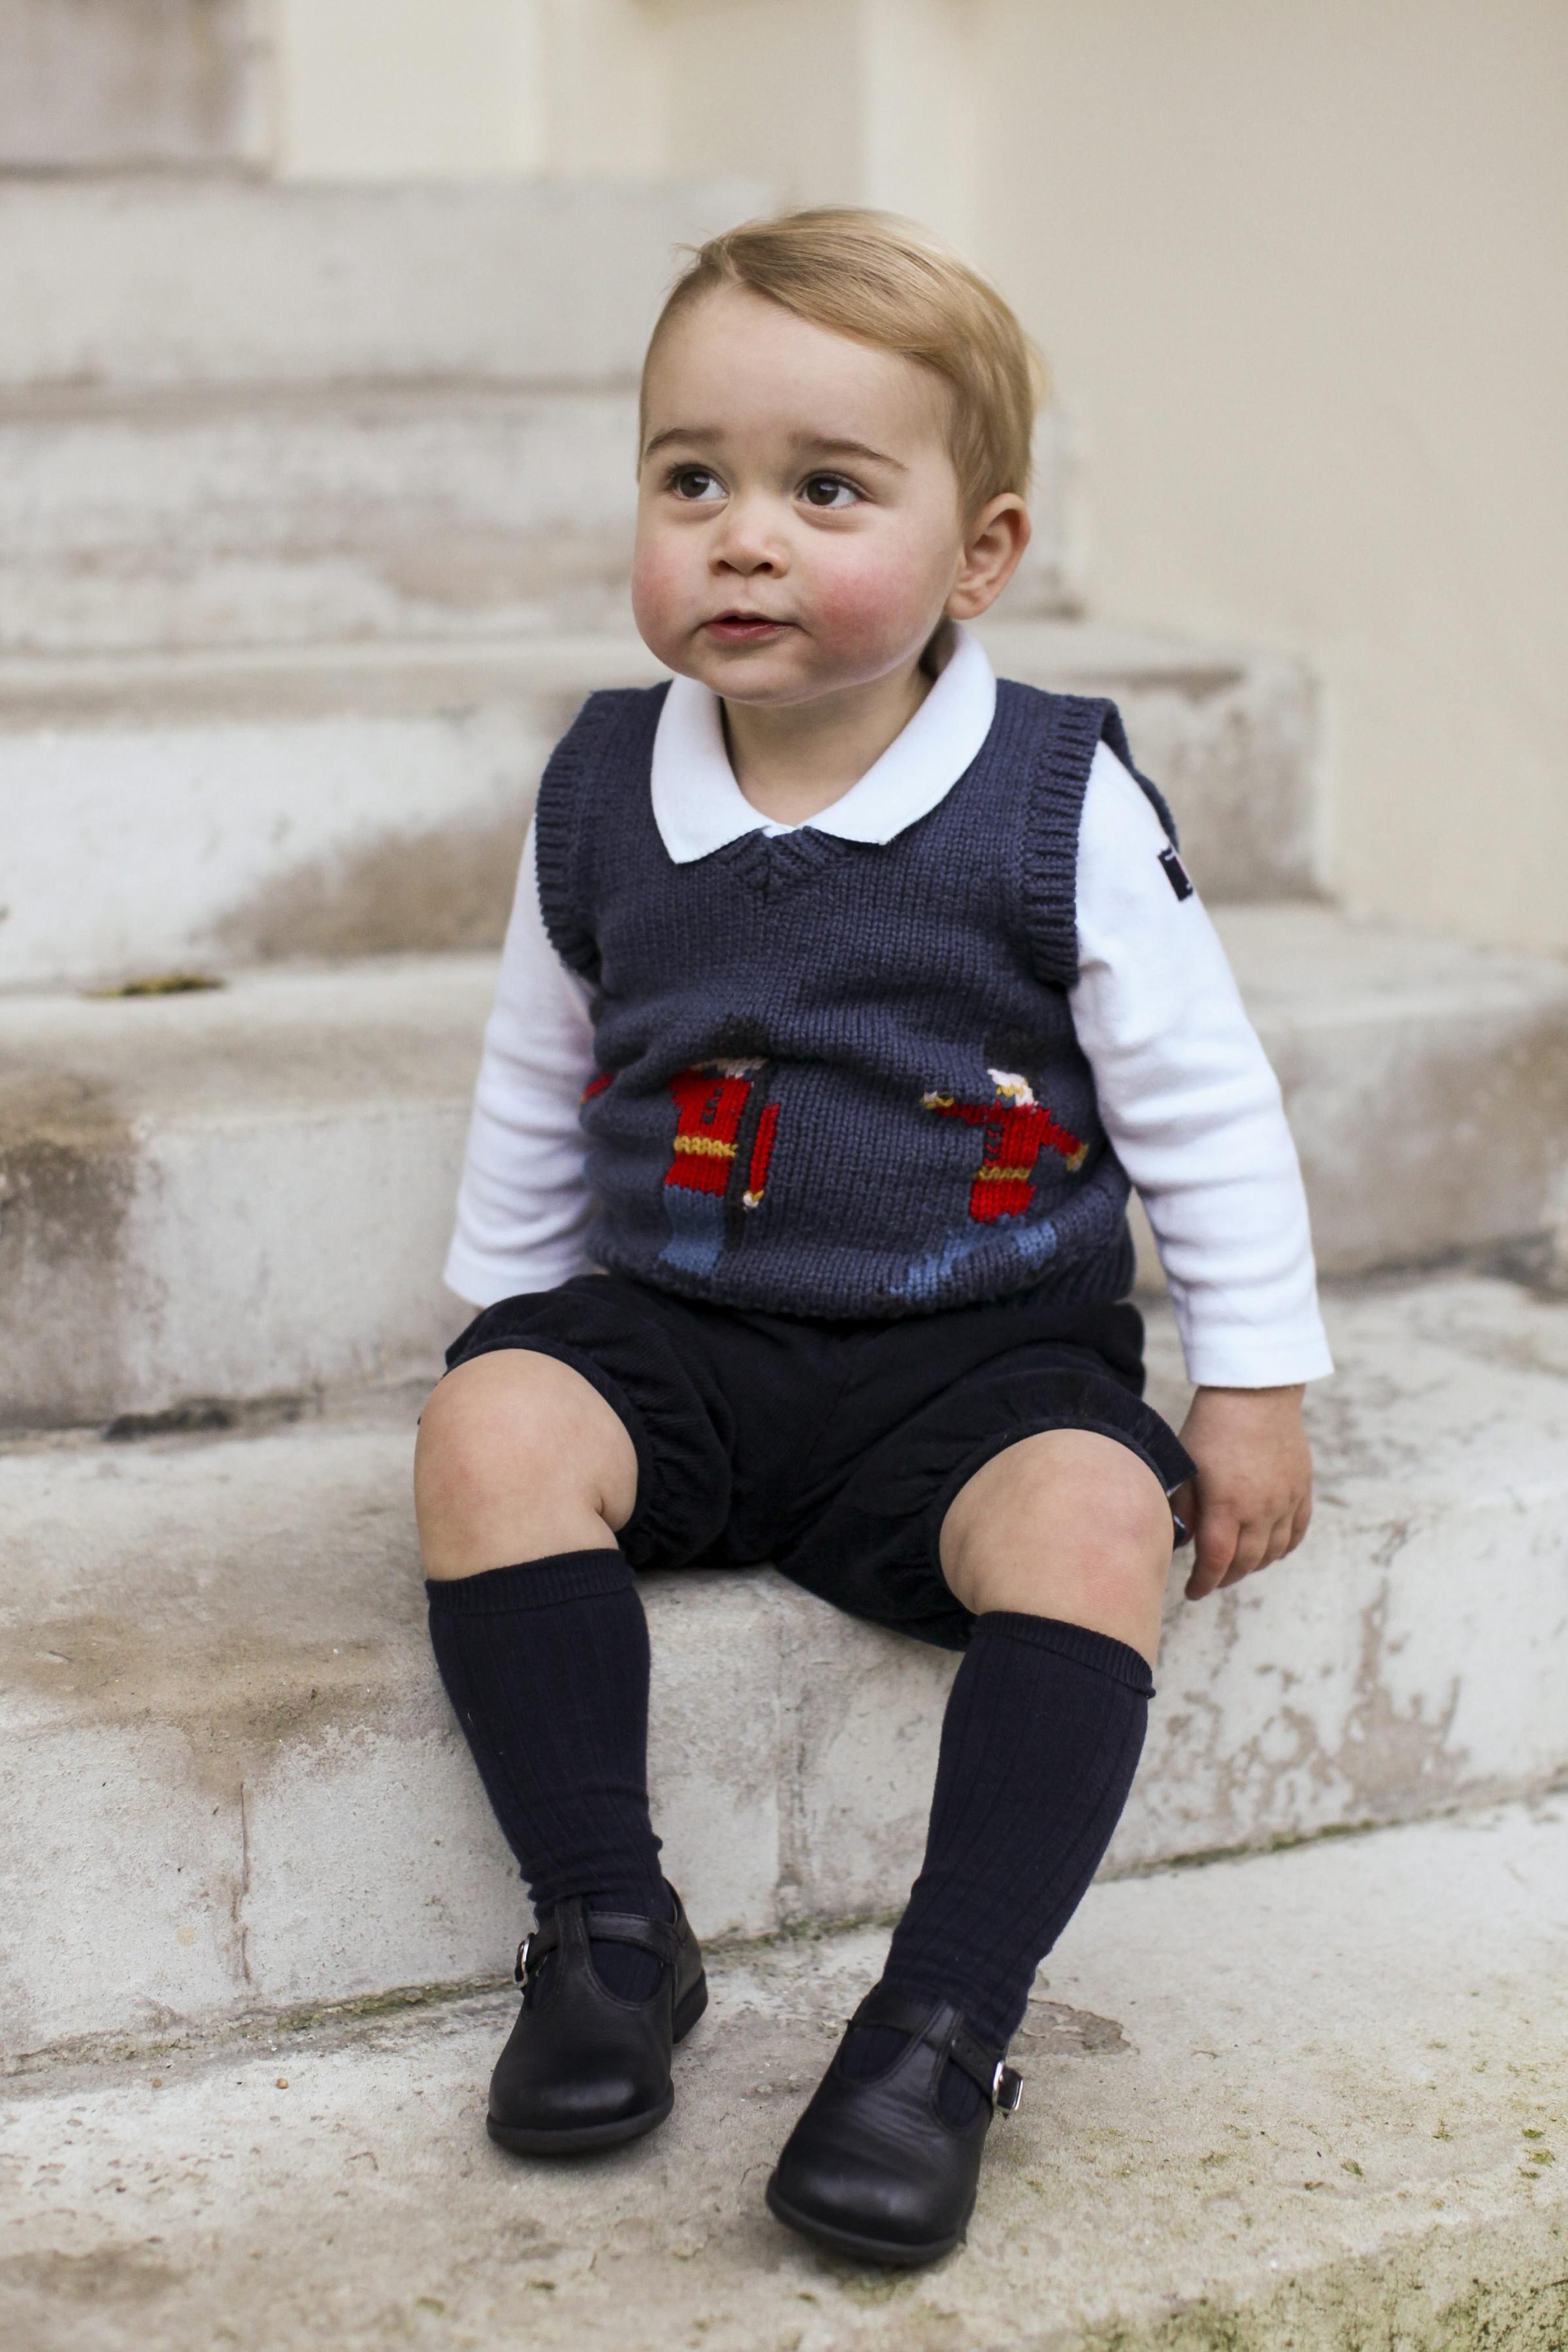 A Christmas photo of Prince George in a courtyard at Kensington Palace, London released on Dec. 13, 2014.